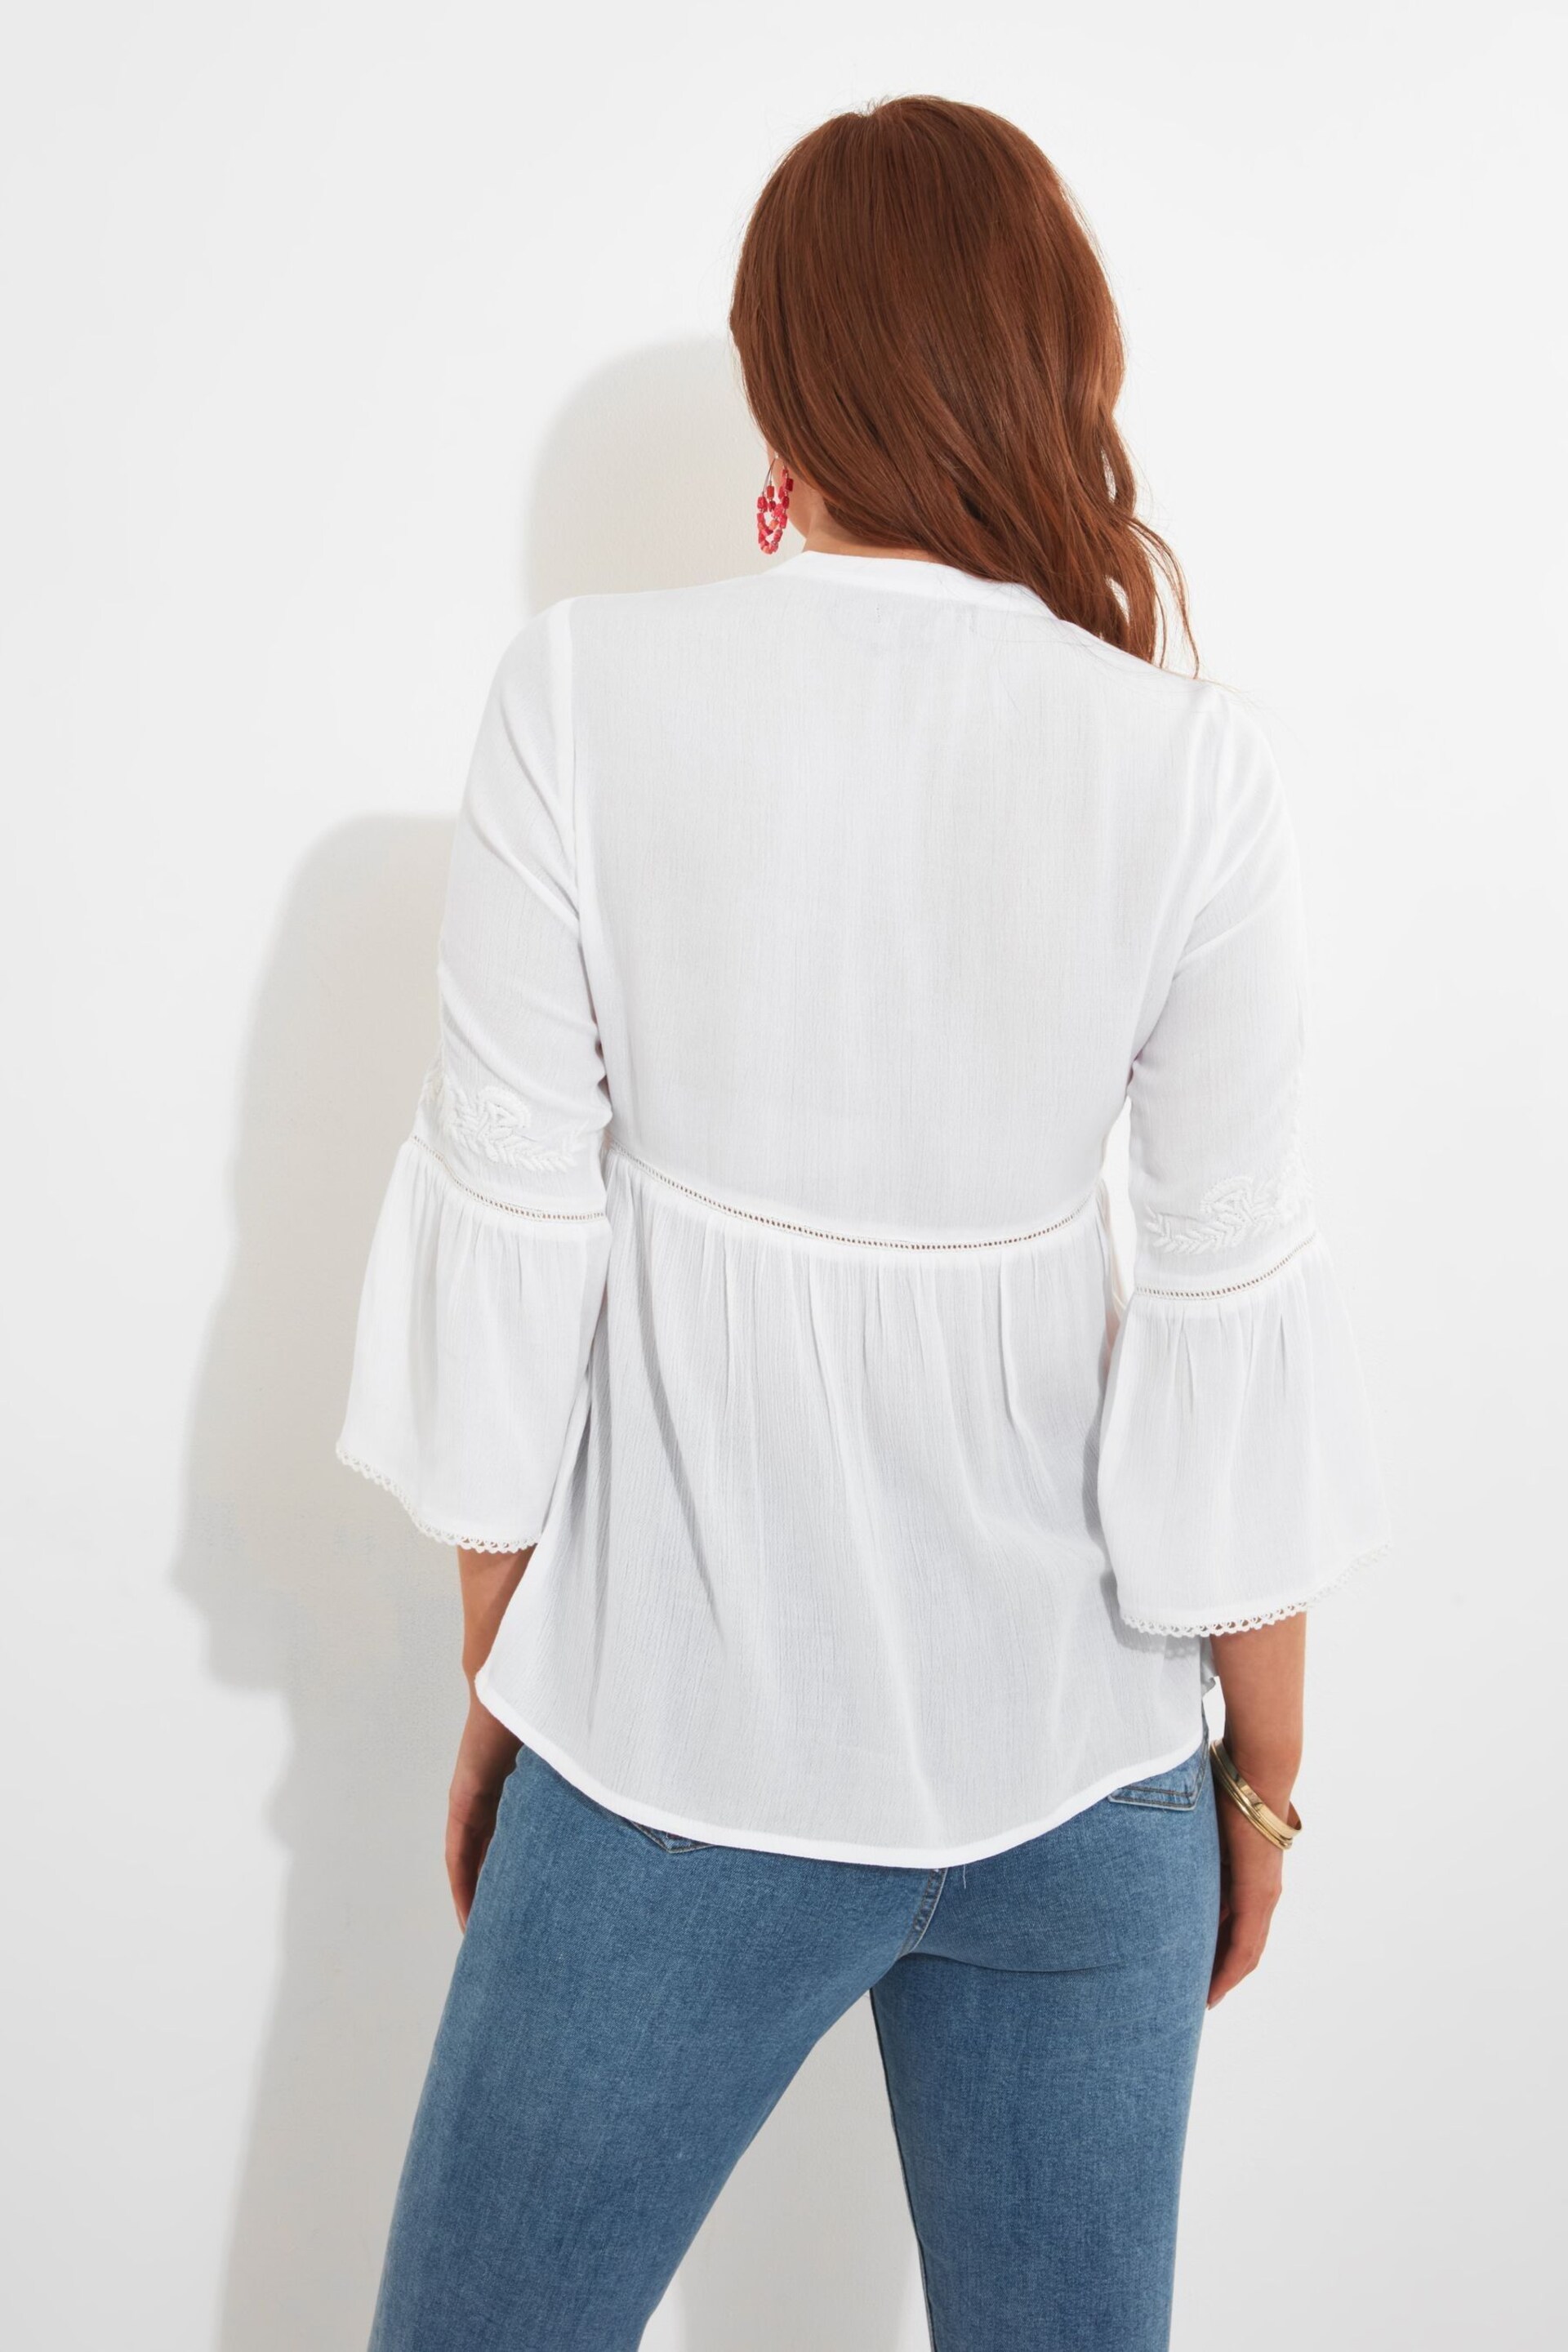 Joe Browns White Embroidered Button Down Collarless Blouse - Image 3 of 6